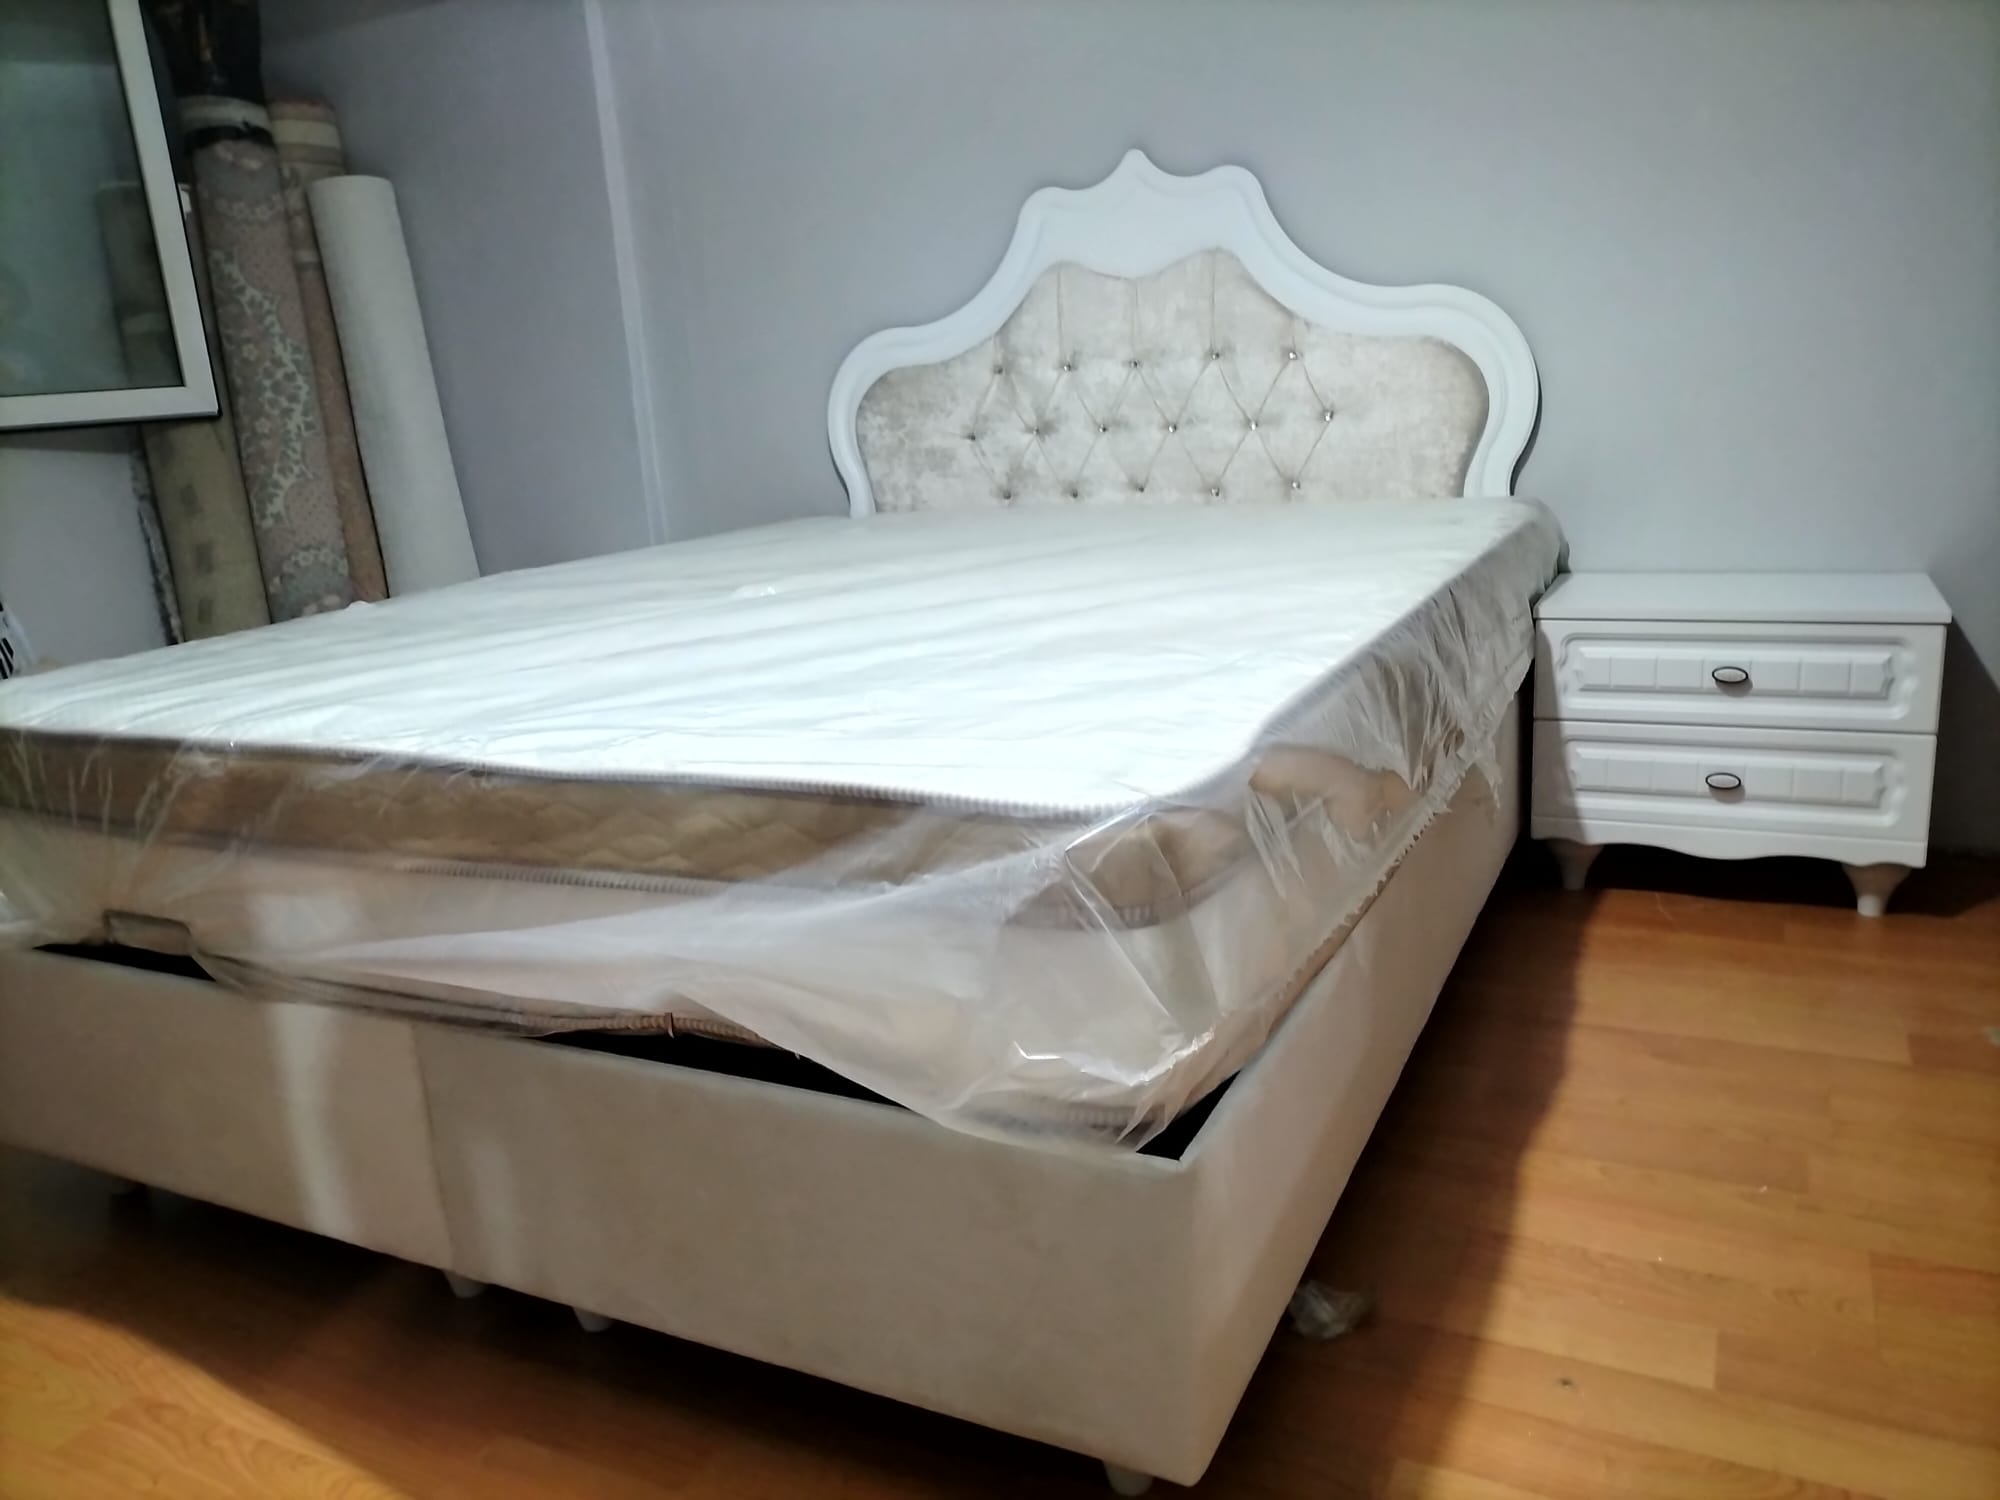 Country Headboard, Bedside Table, Solid Base, Neon Balance Mattress